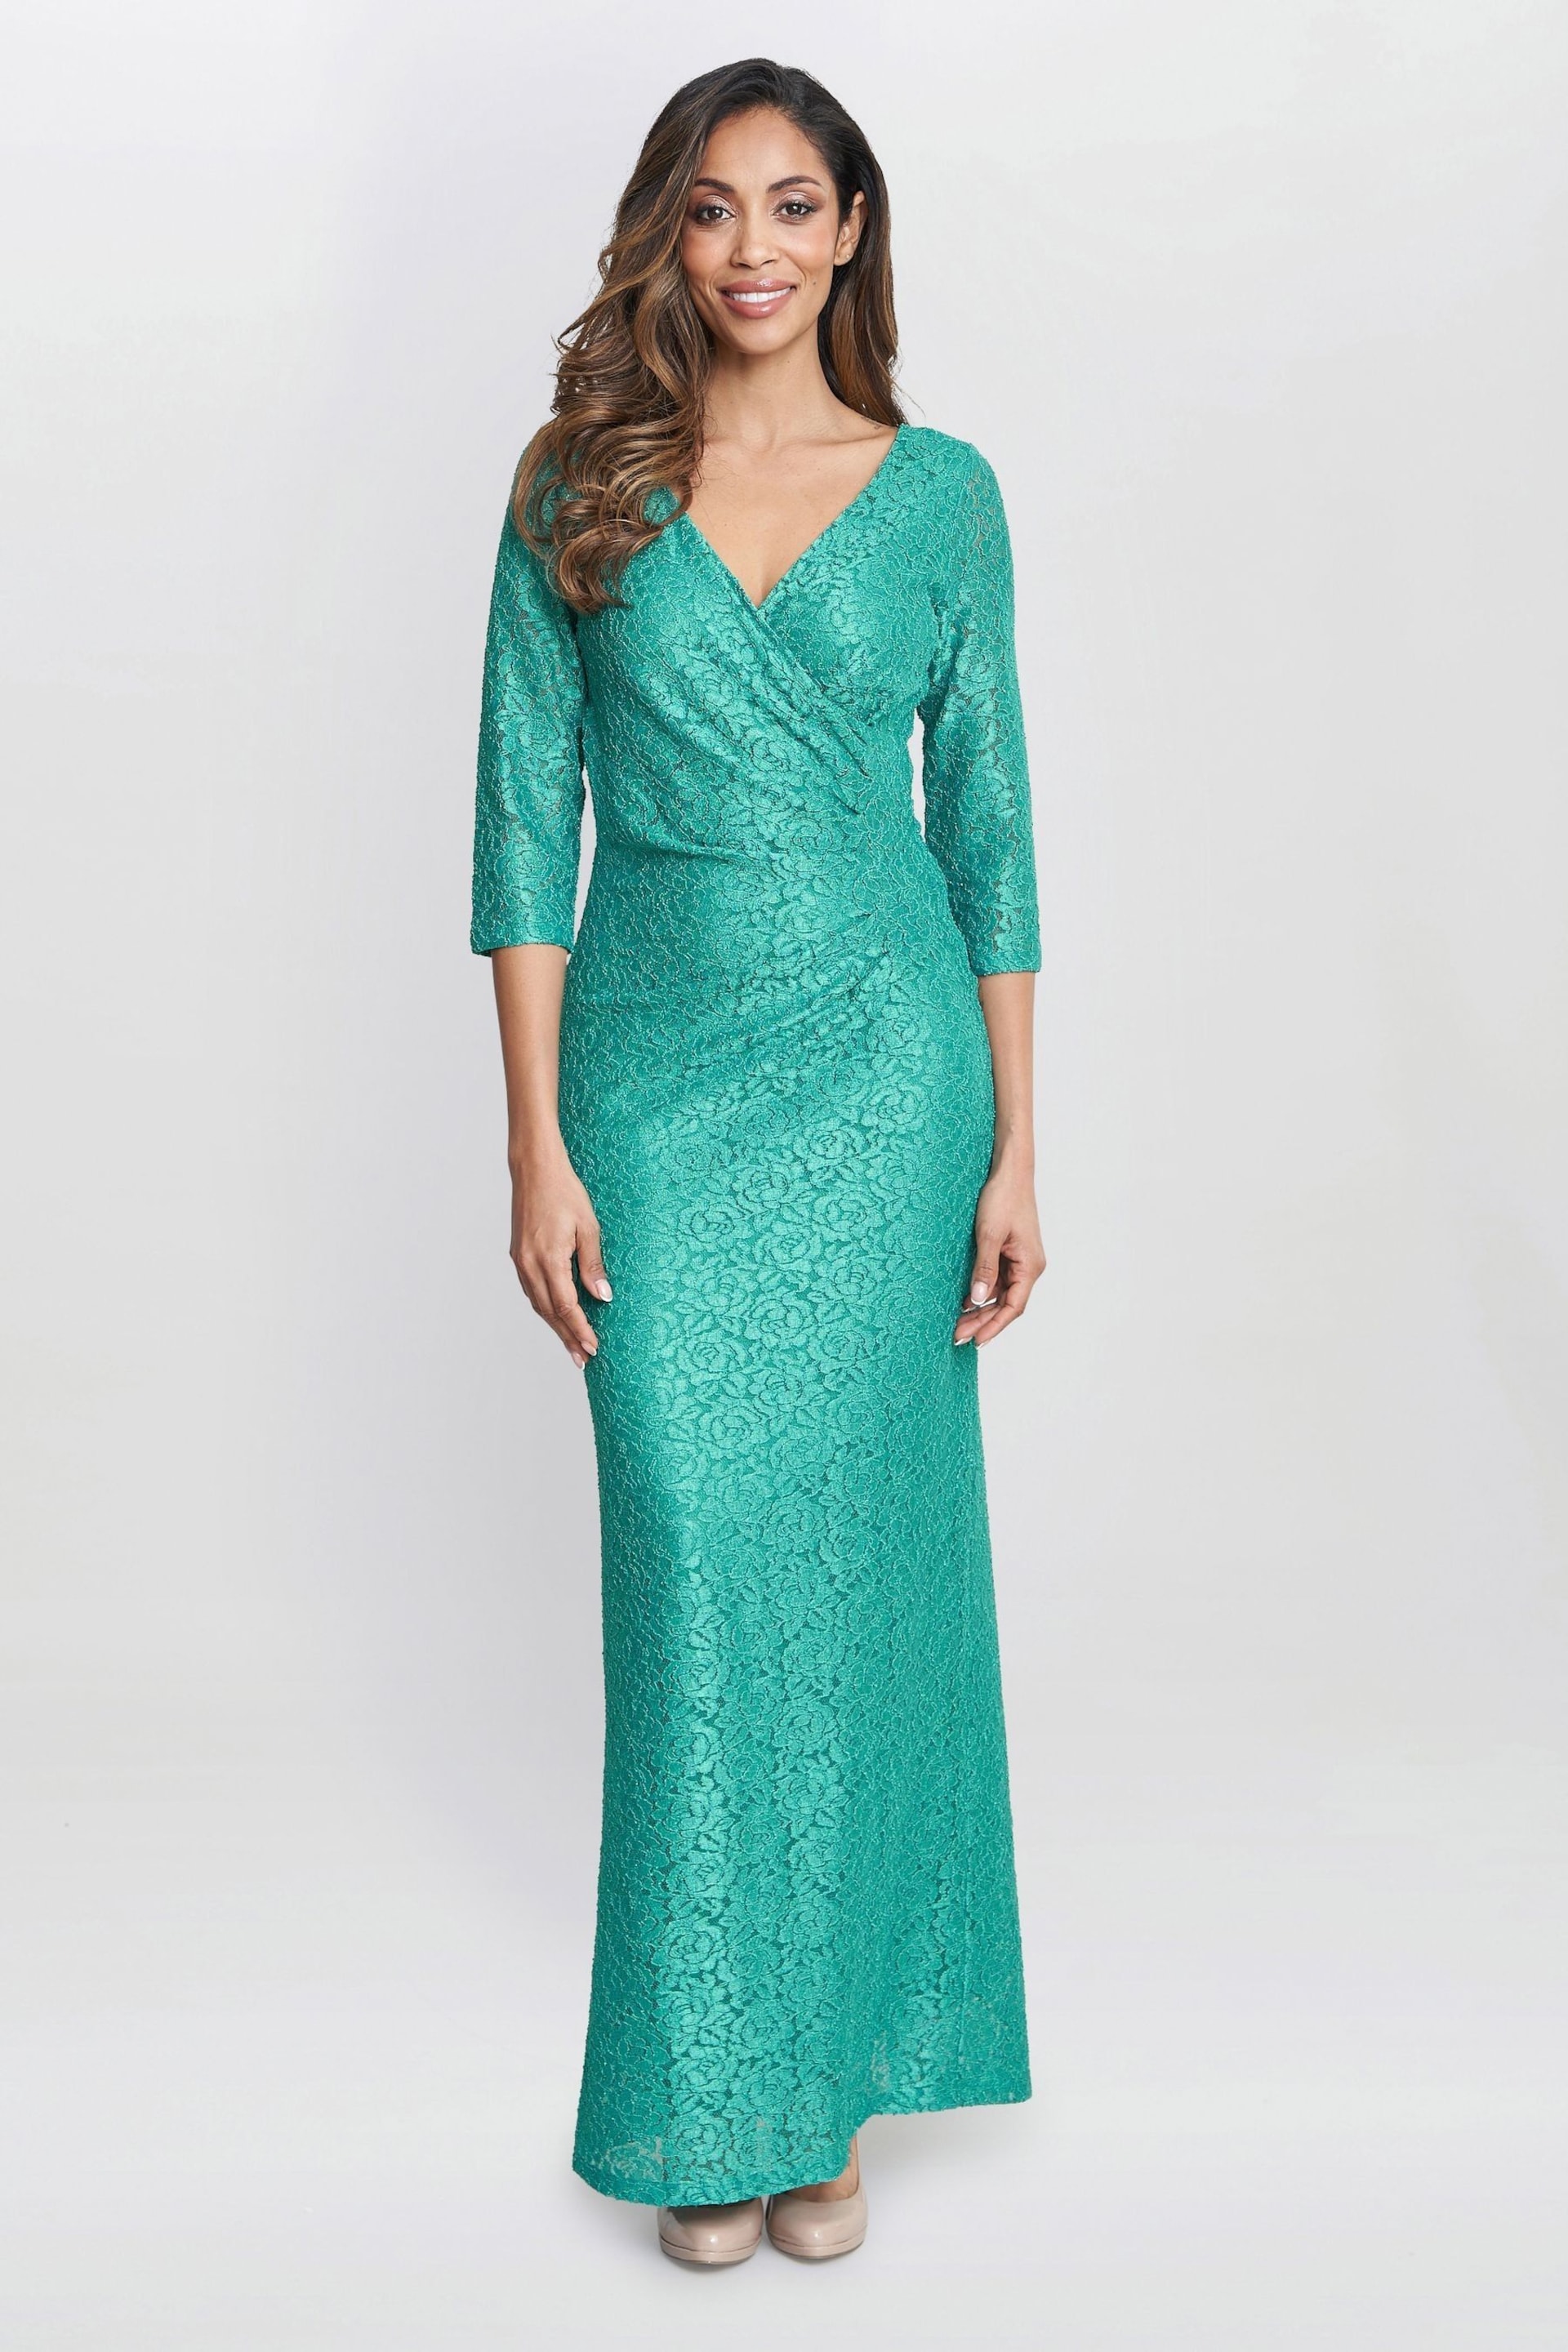 Gina Bacconi Green Fearne Lace Wrap Maxi Dress - Image 1 of 6